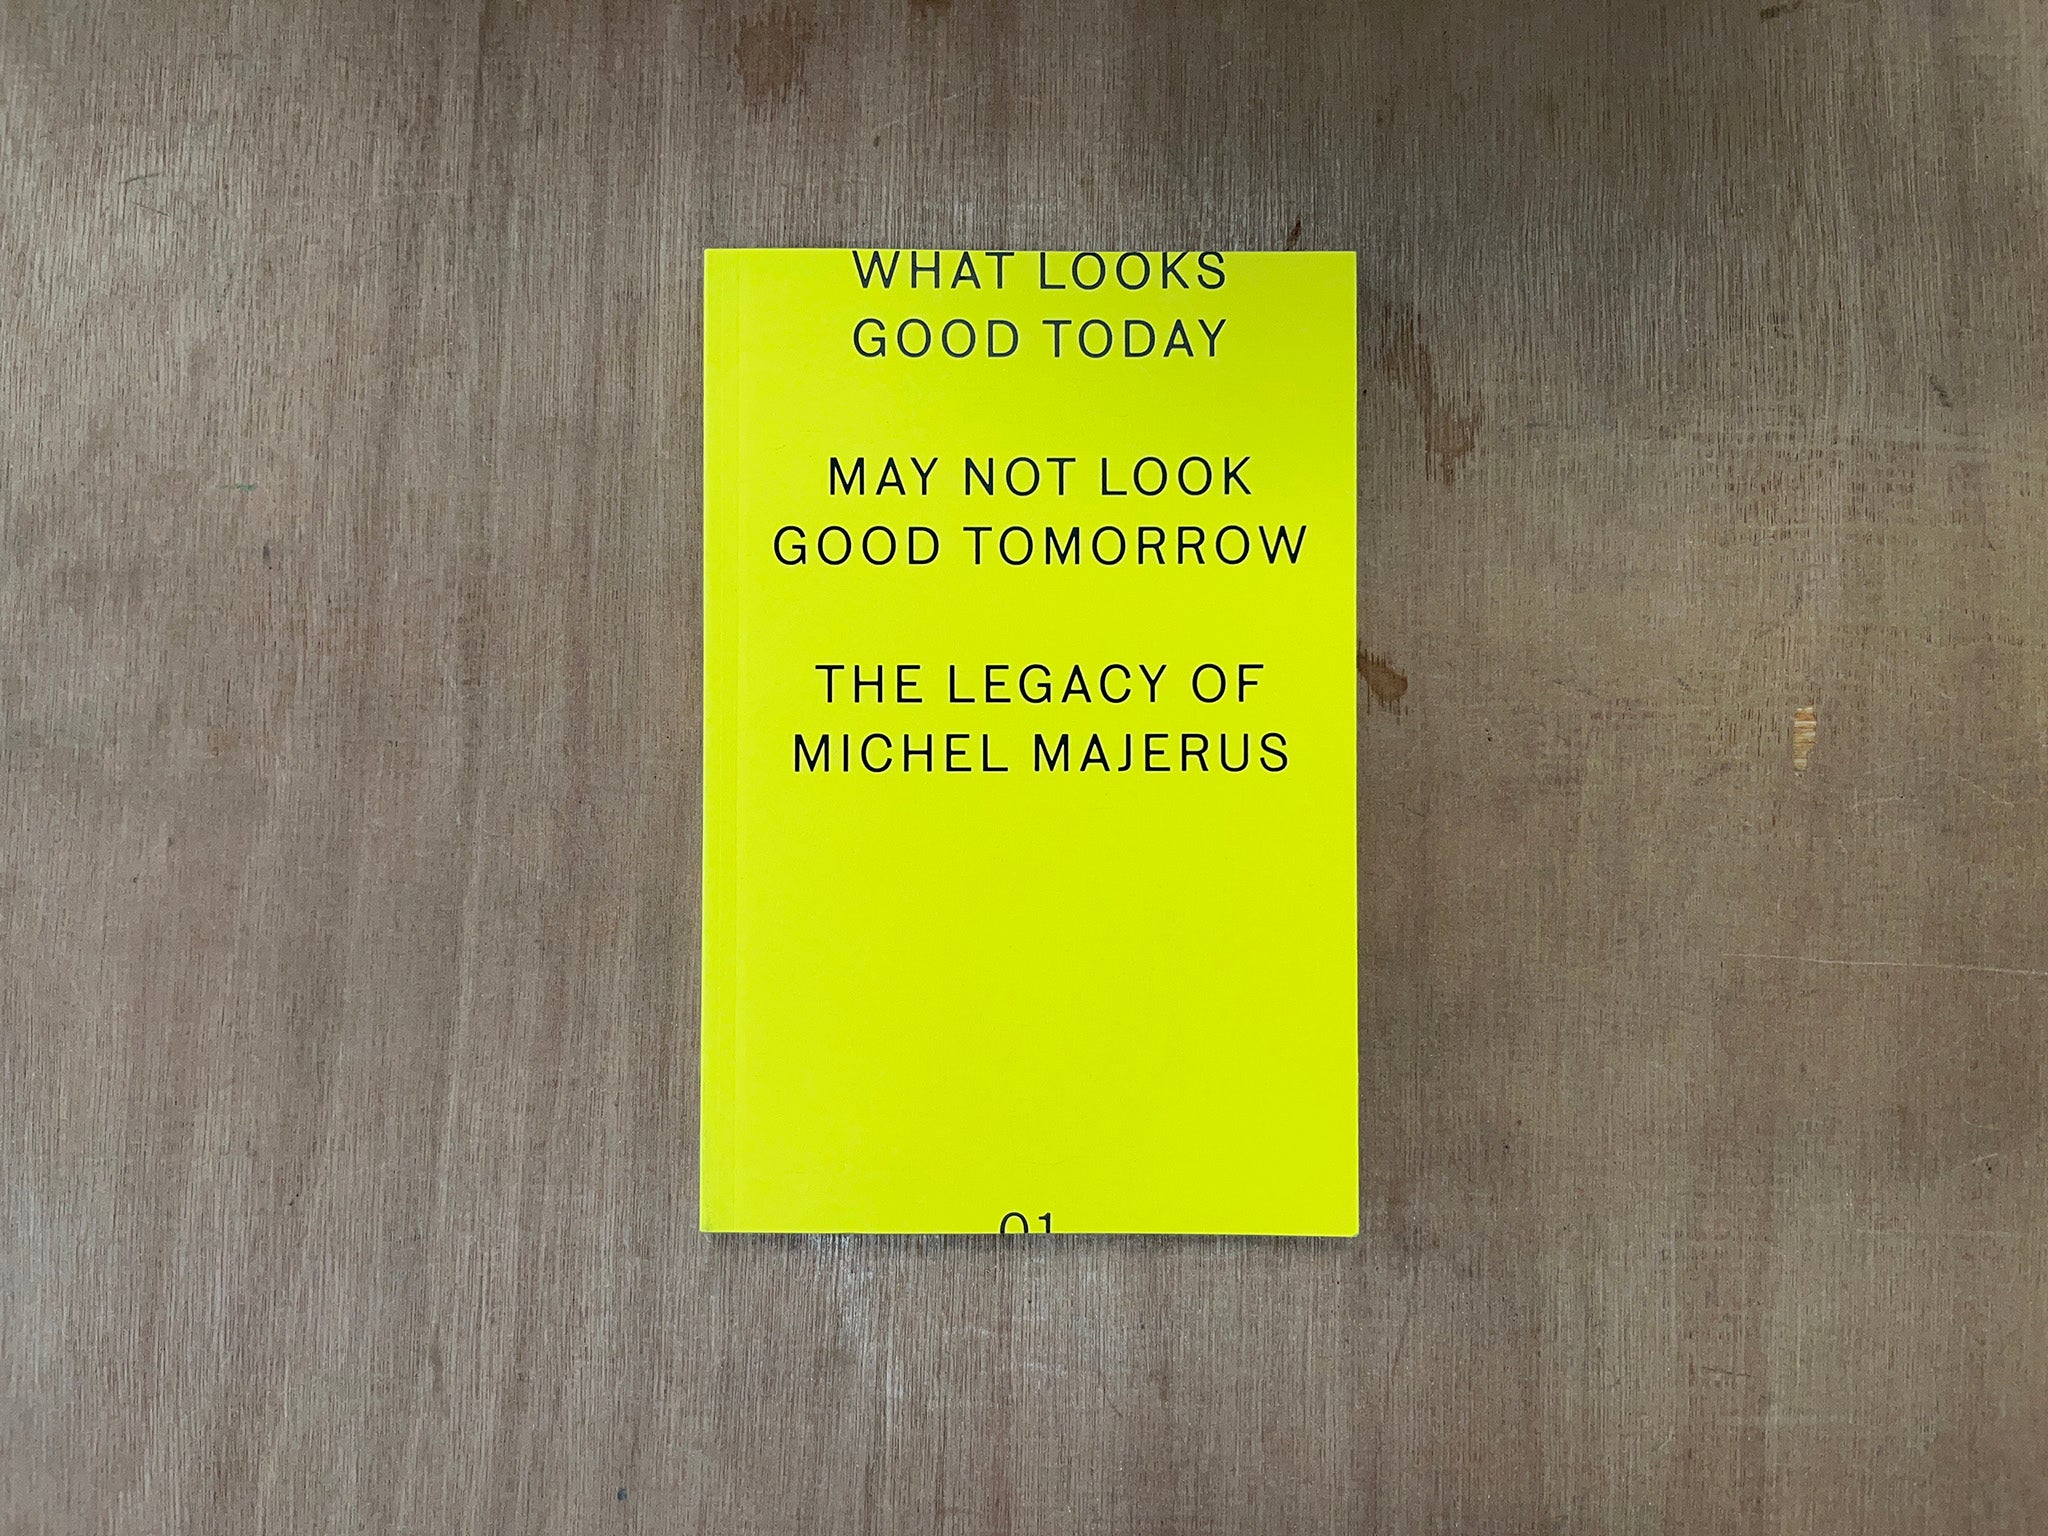 WHAT LOOKS GOOD TODAY MAY NOT LOOK GOOD TOMORROW: THE LEGACY OF MICHEL MAJERUS Ed. by Bettina Steinbrügge